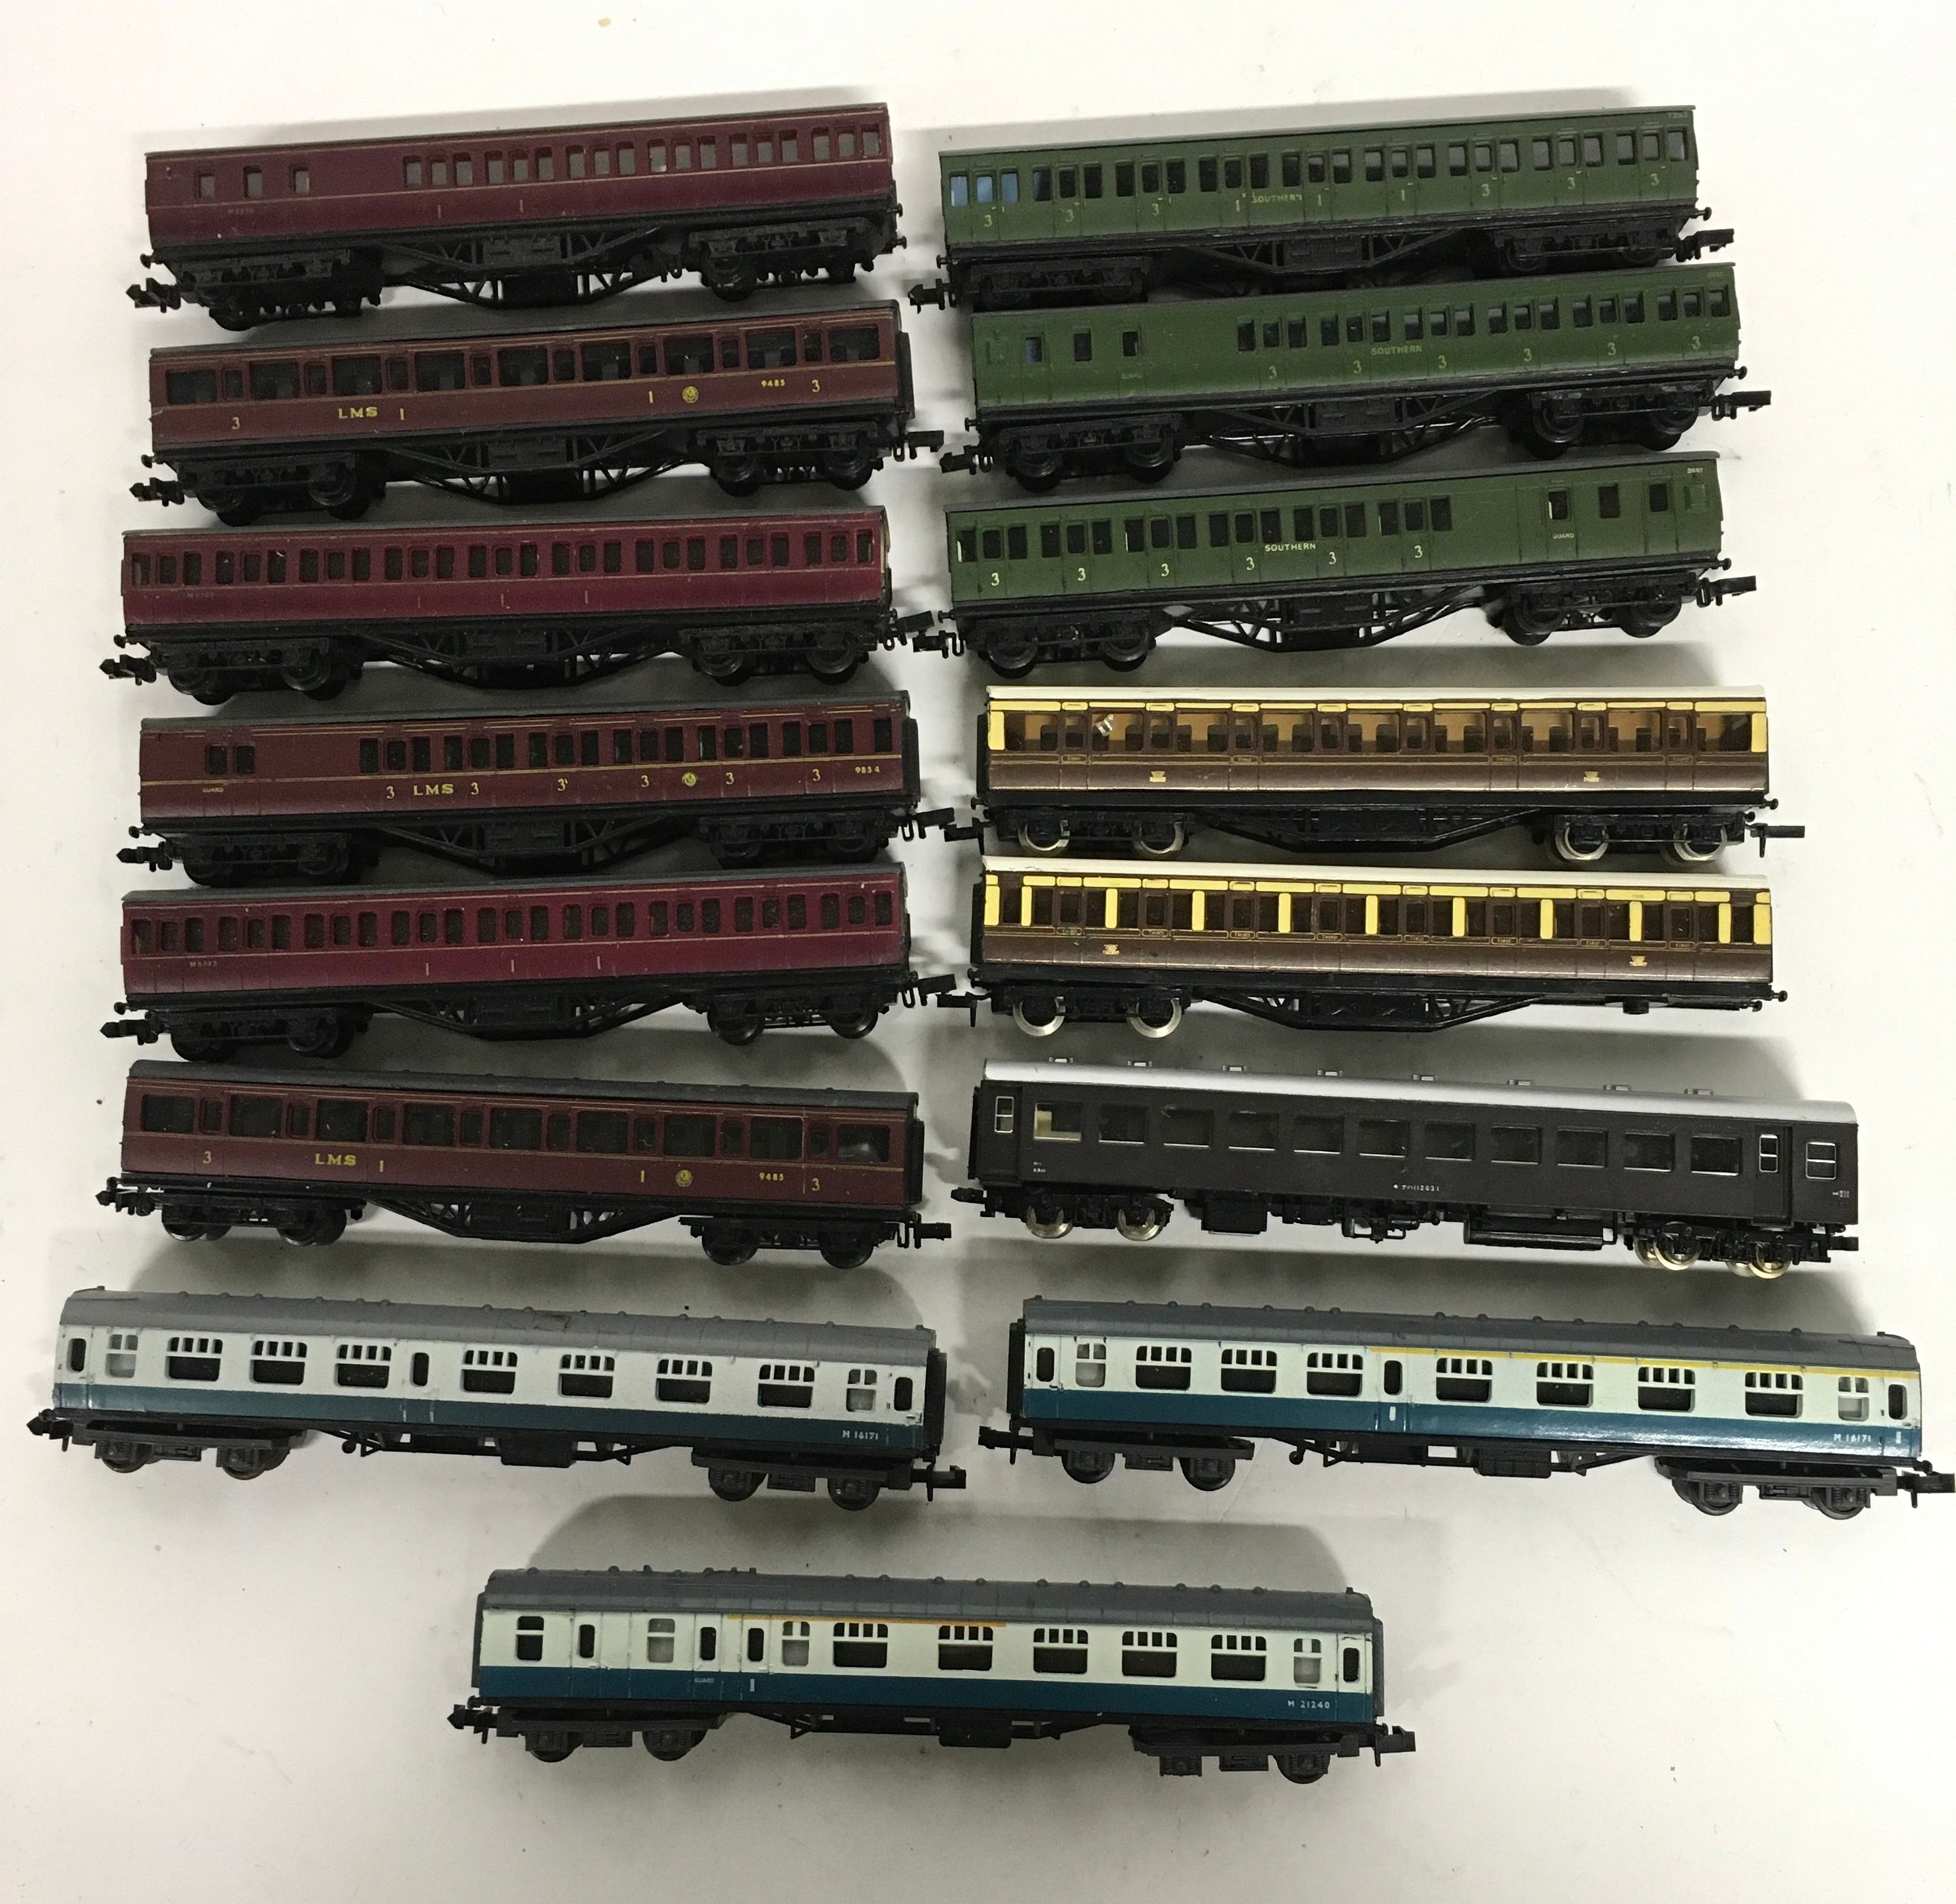 15 x various N Gauge coaches. Generally good condition (2 missing set of wheels).